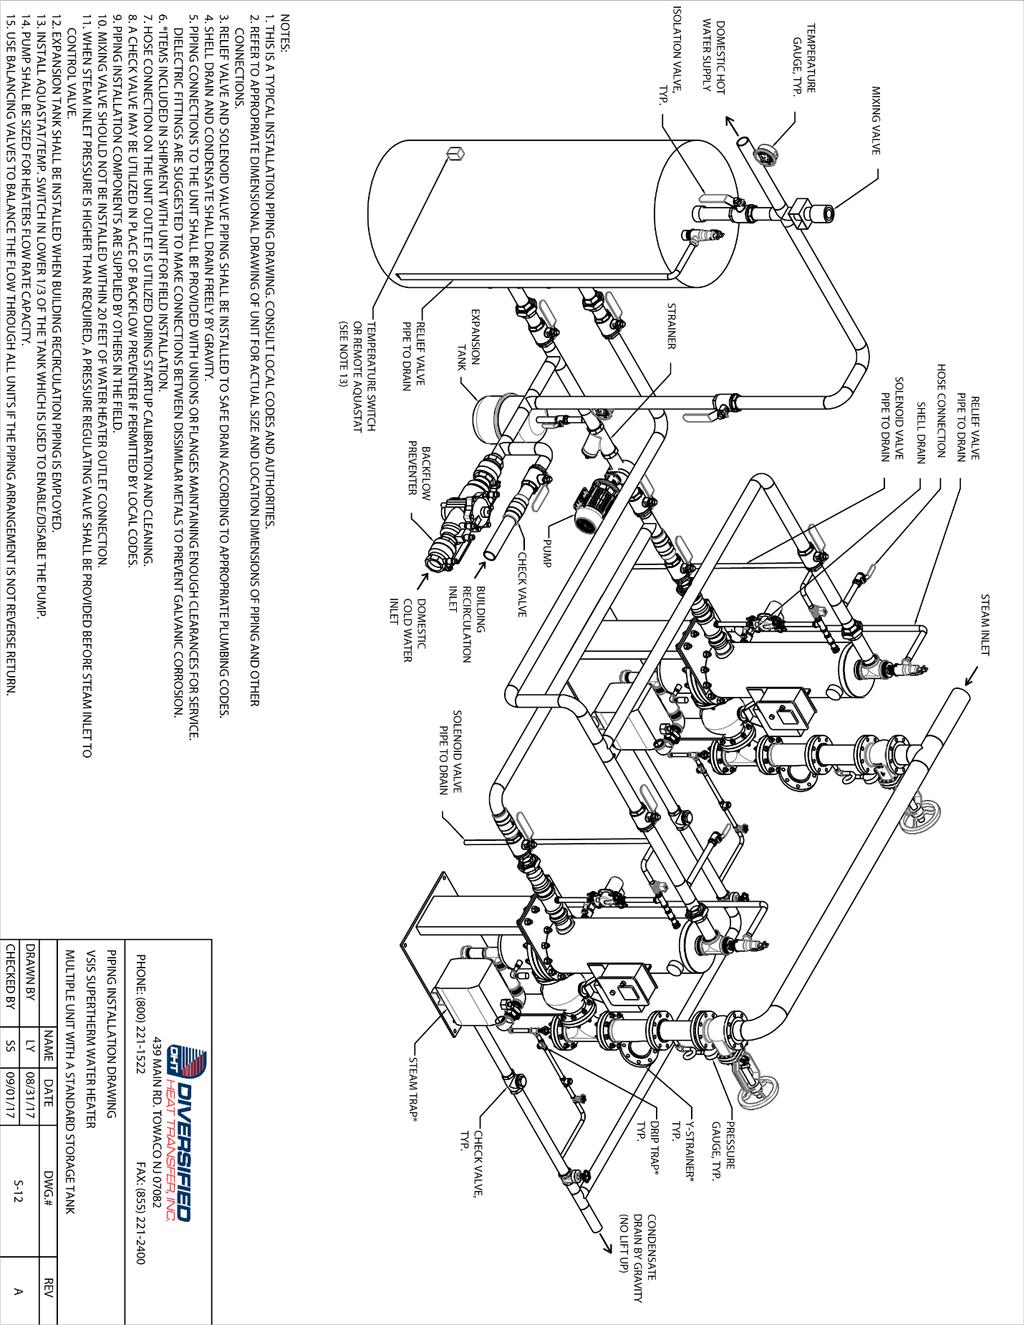 SECTION 6: TECHNICAL DRAWINGS & FORMS Page 74 of 91 Diversified Heat Transfer, Inc.